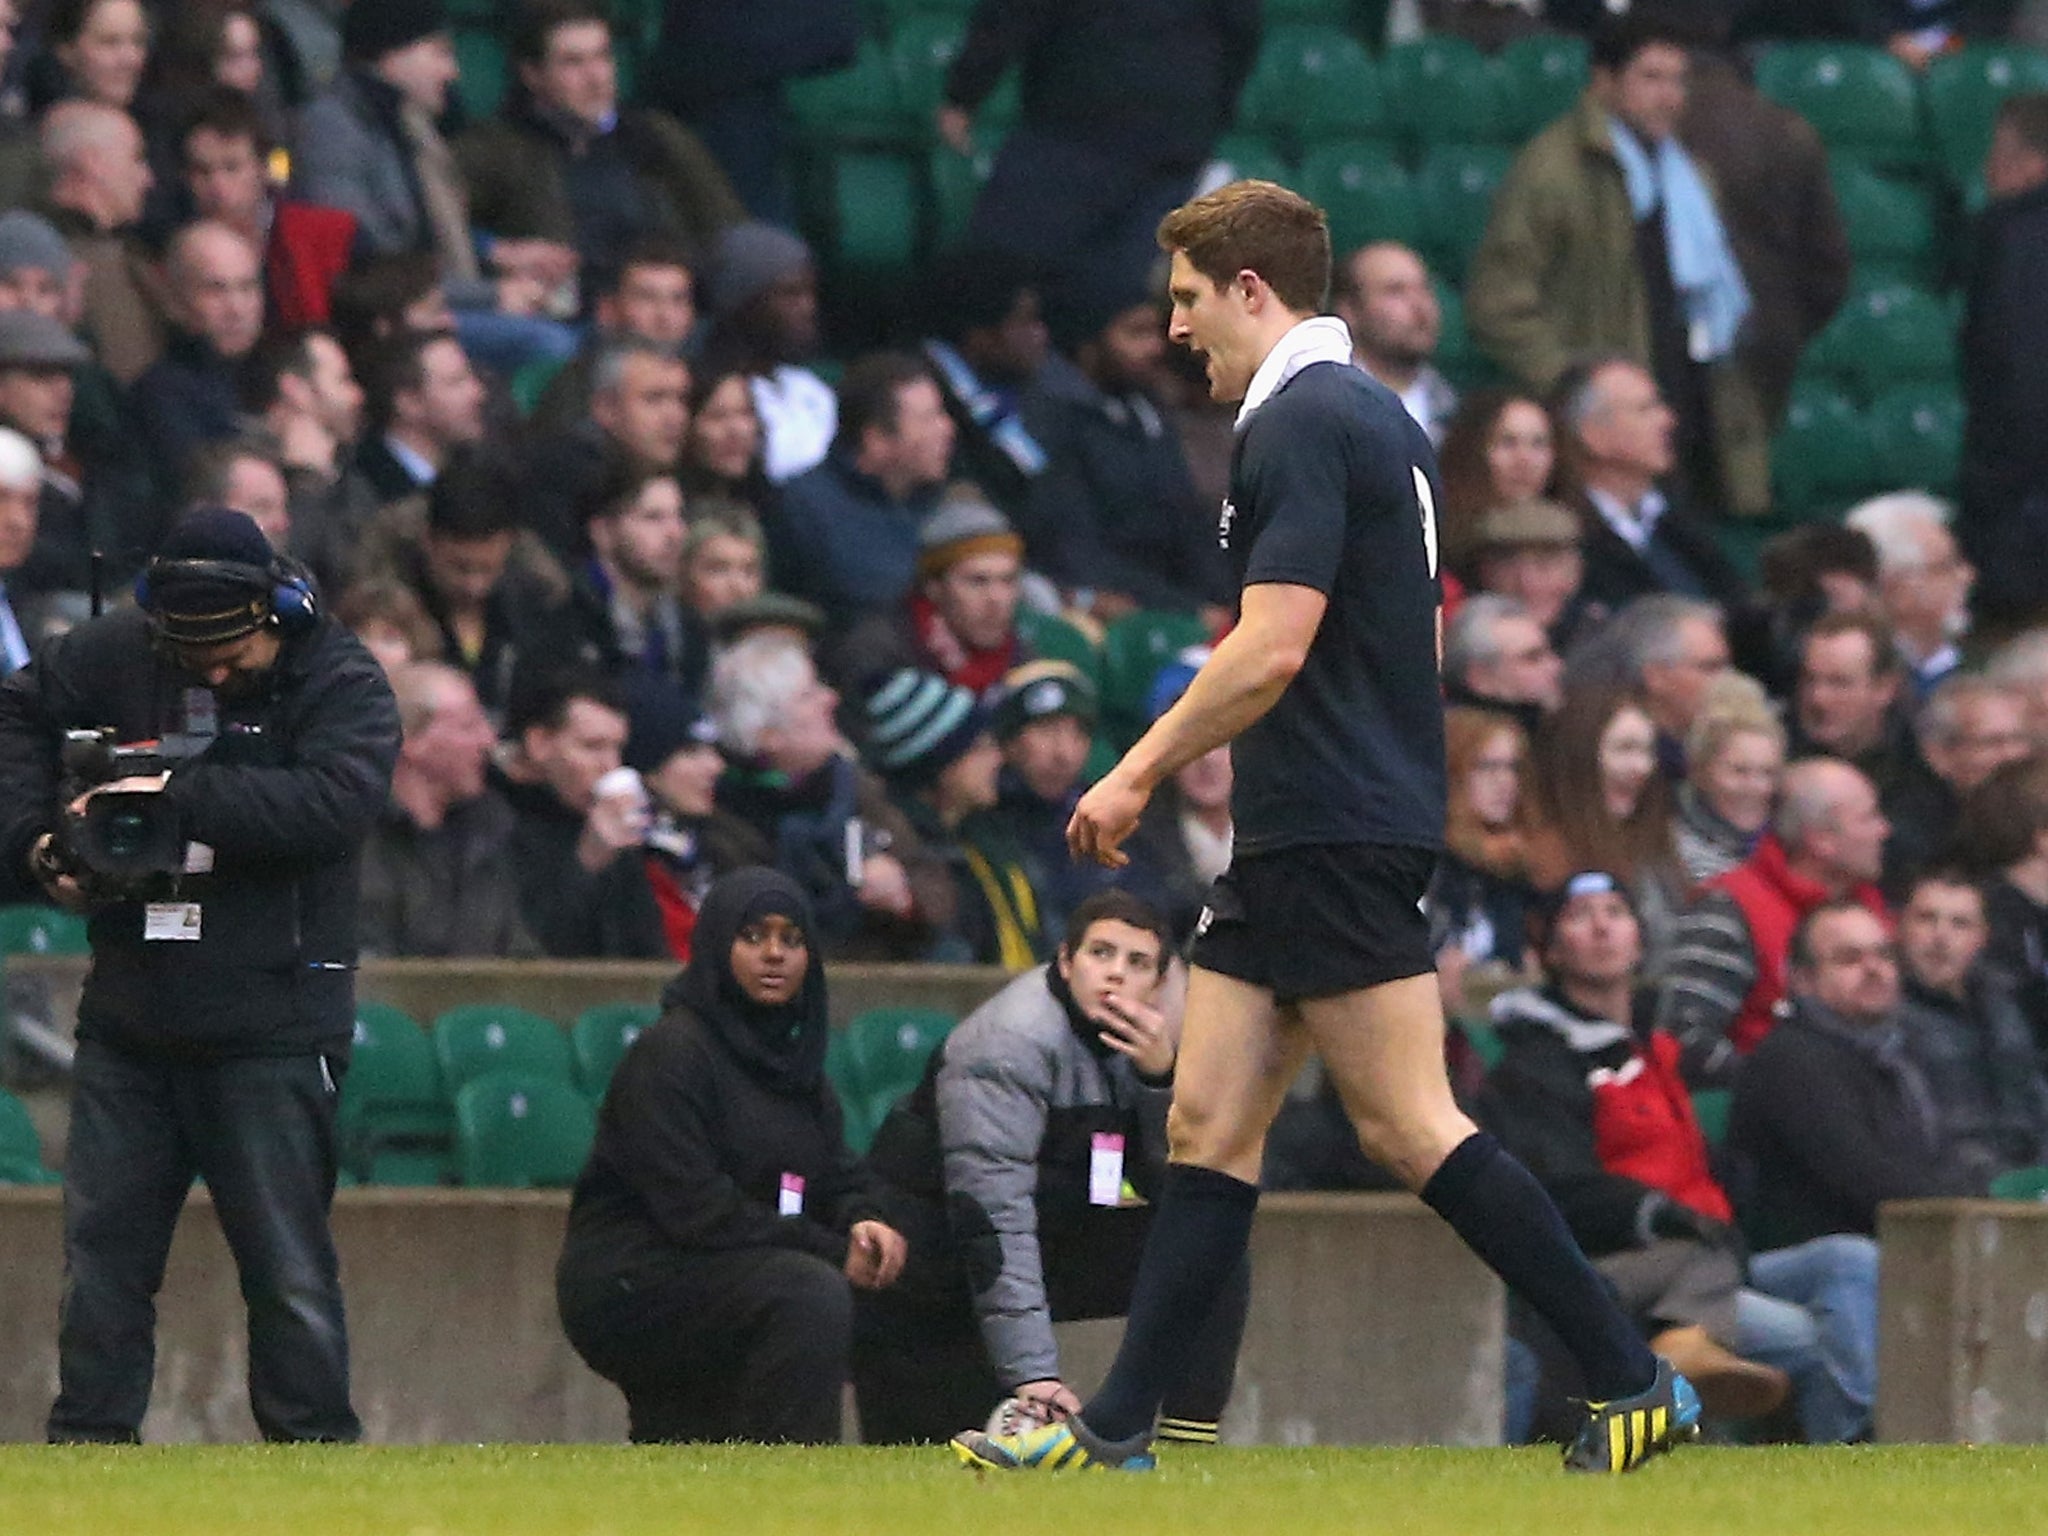 Oxford scrum-half Sam Egerton walks off the Twickenham pitch after becoming the first person to be sent off in the Cambridge v Oxford varsity match